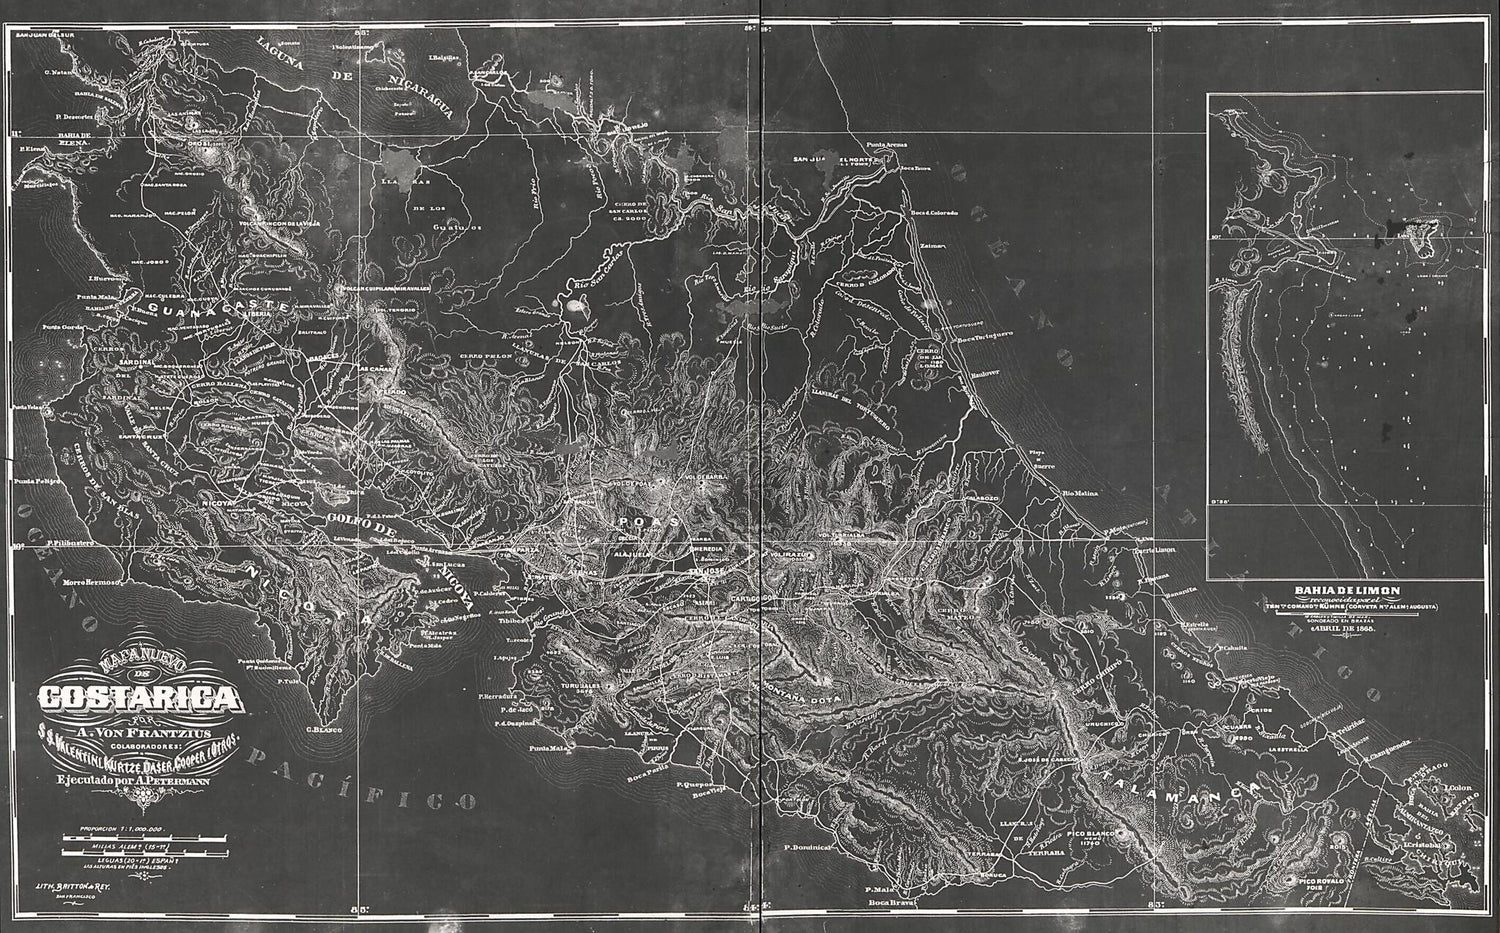 This old map of Mapa Nueva De Costarica from 1868 was created by Alexander Von Frantzius in 1868